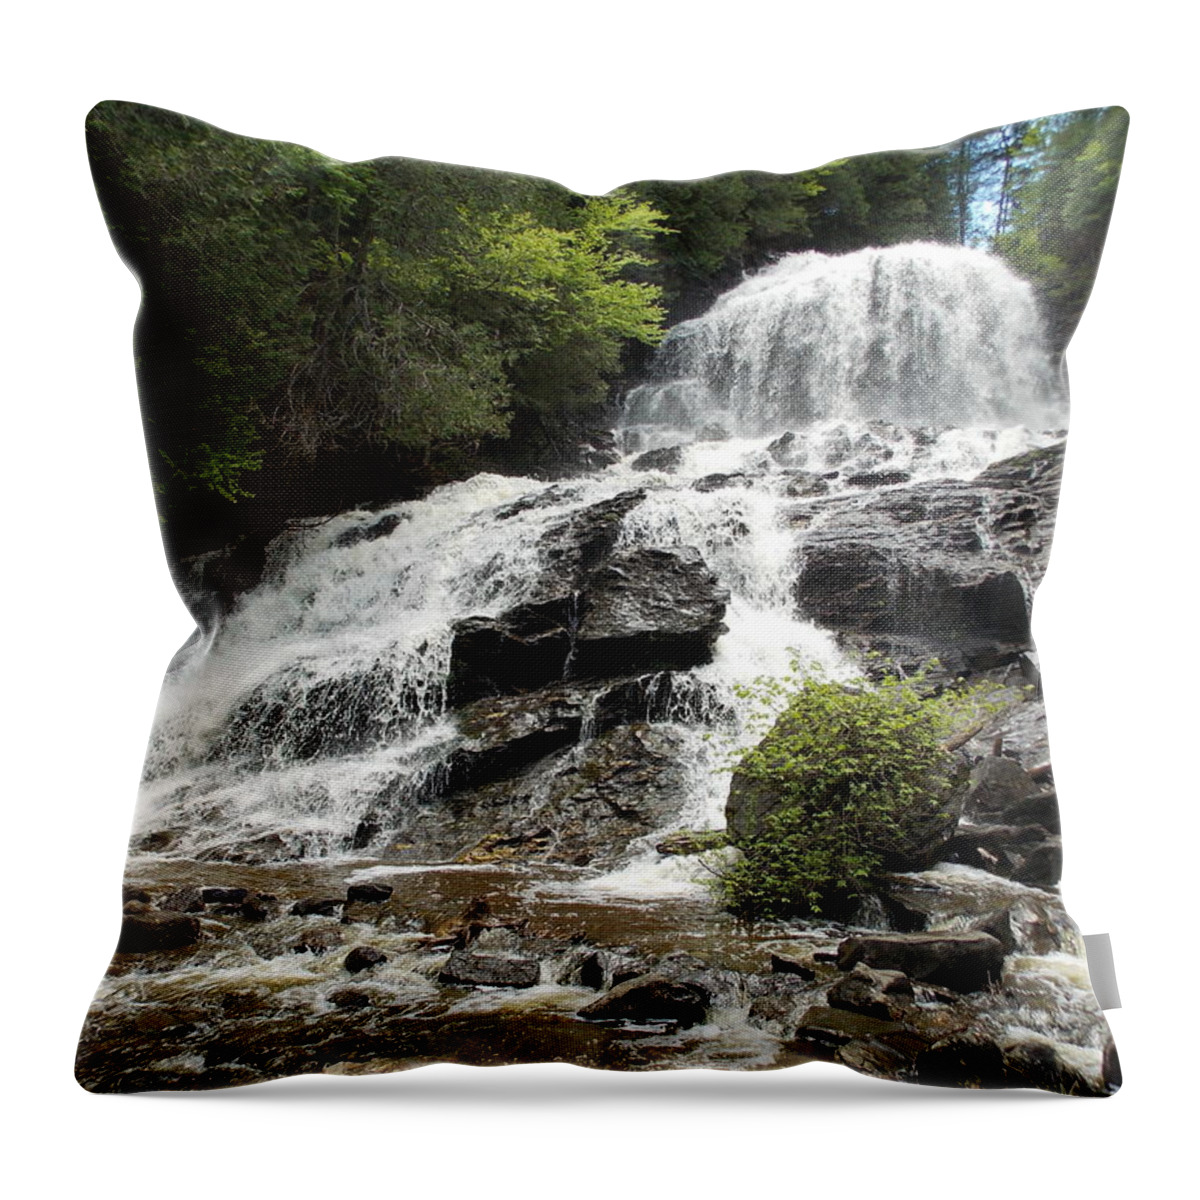 Beaver Brook Falls Throw Pillow featuring the photograph Beaver Brook Falls by Catherine Gagne